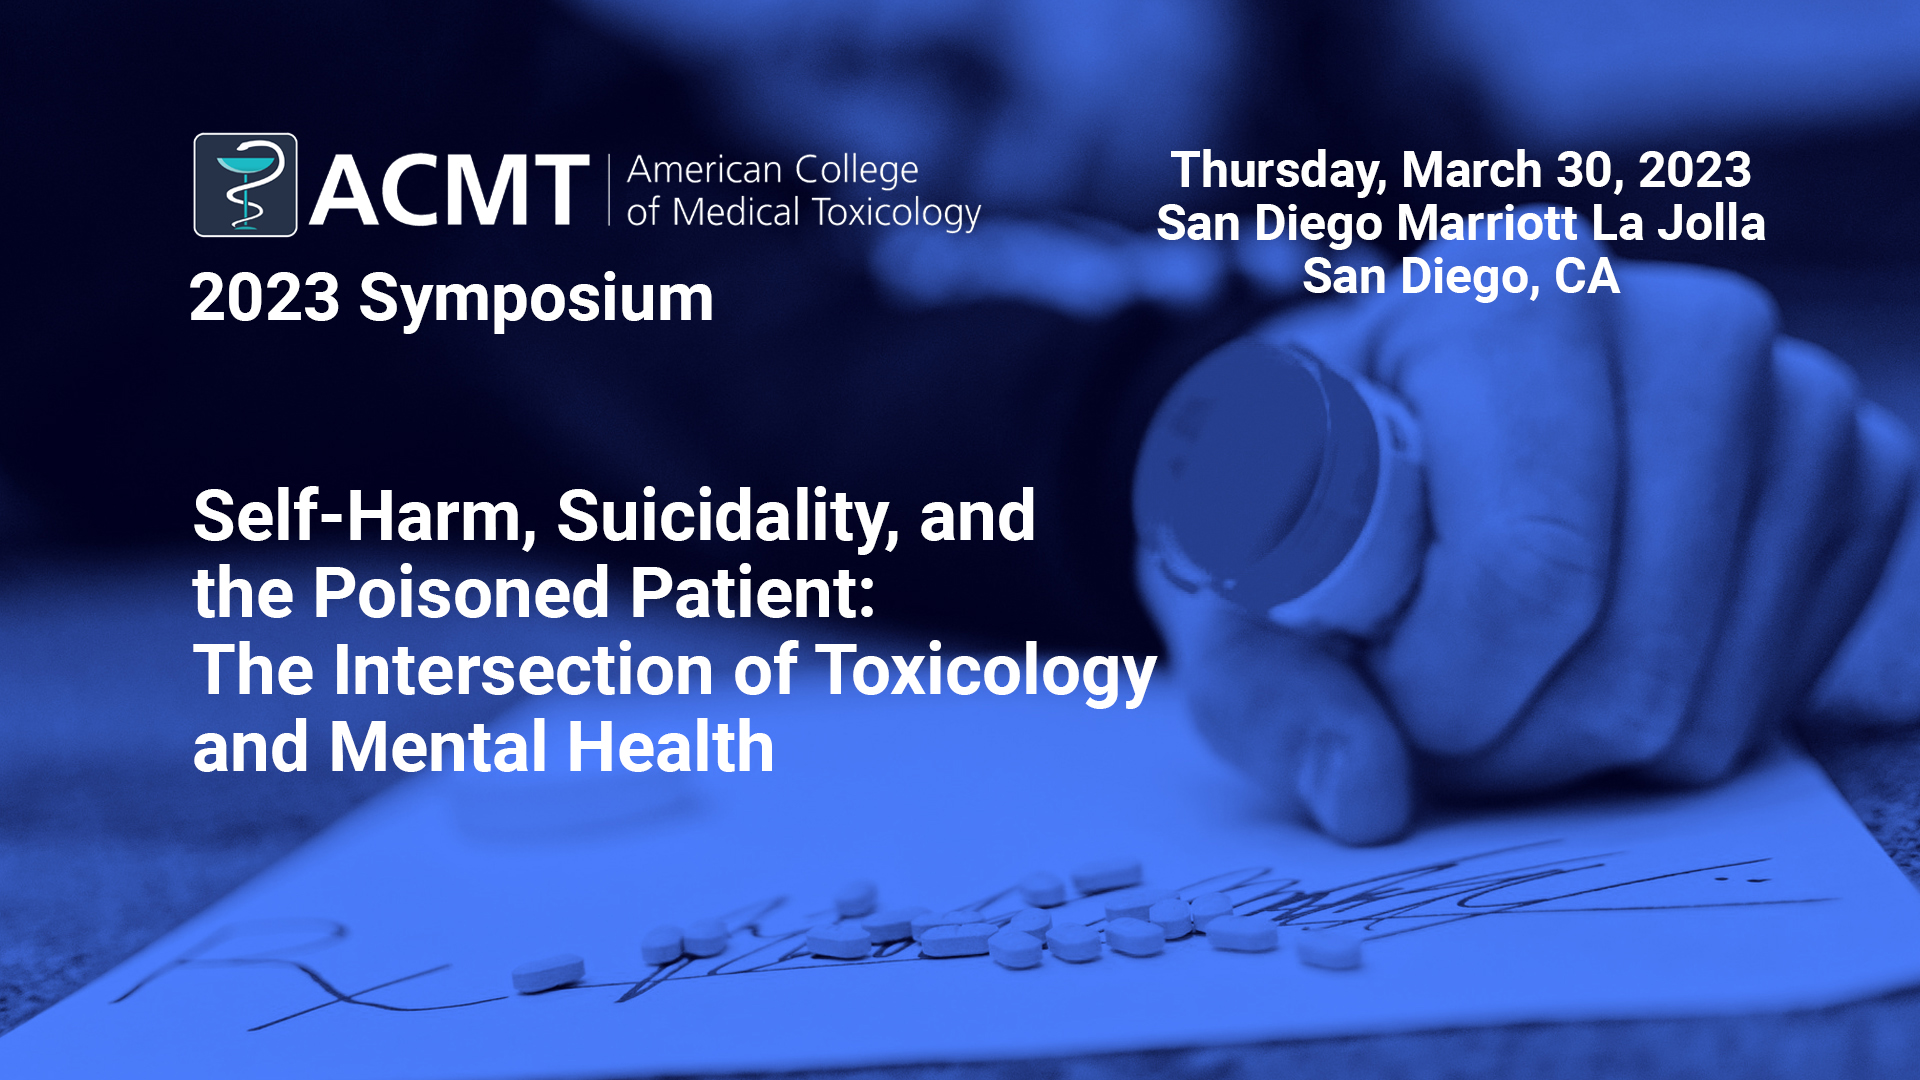 Symposium to Address Suicidality, Bridging Toxicology and Mental Health